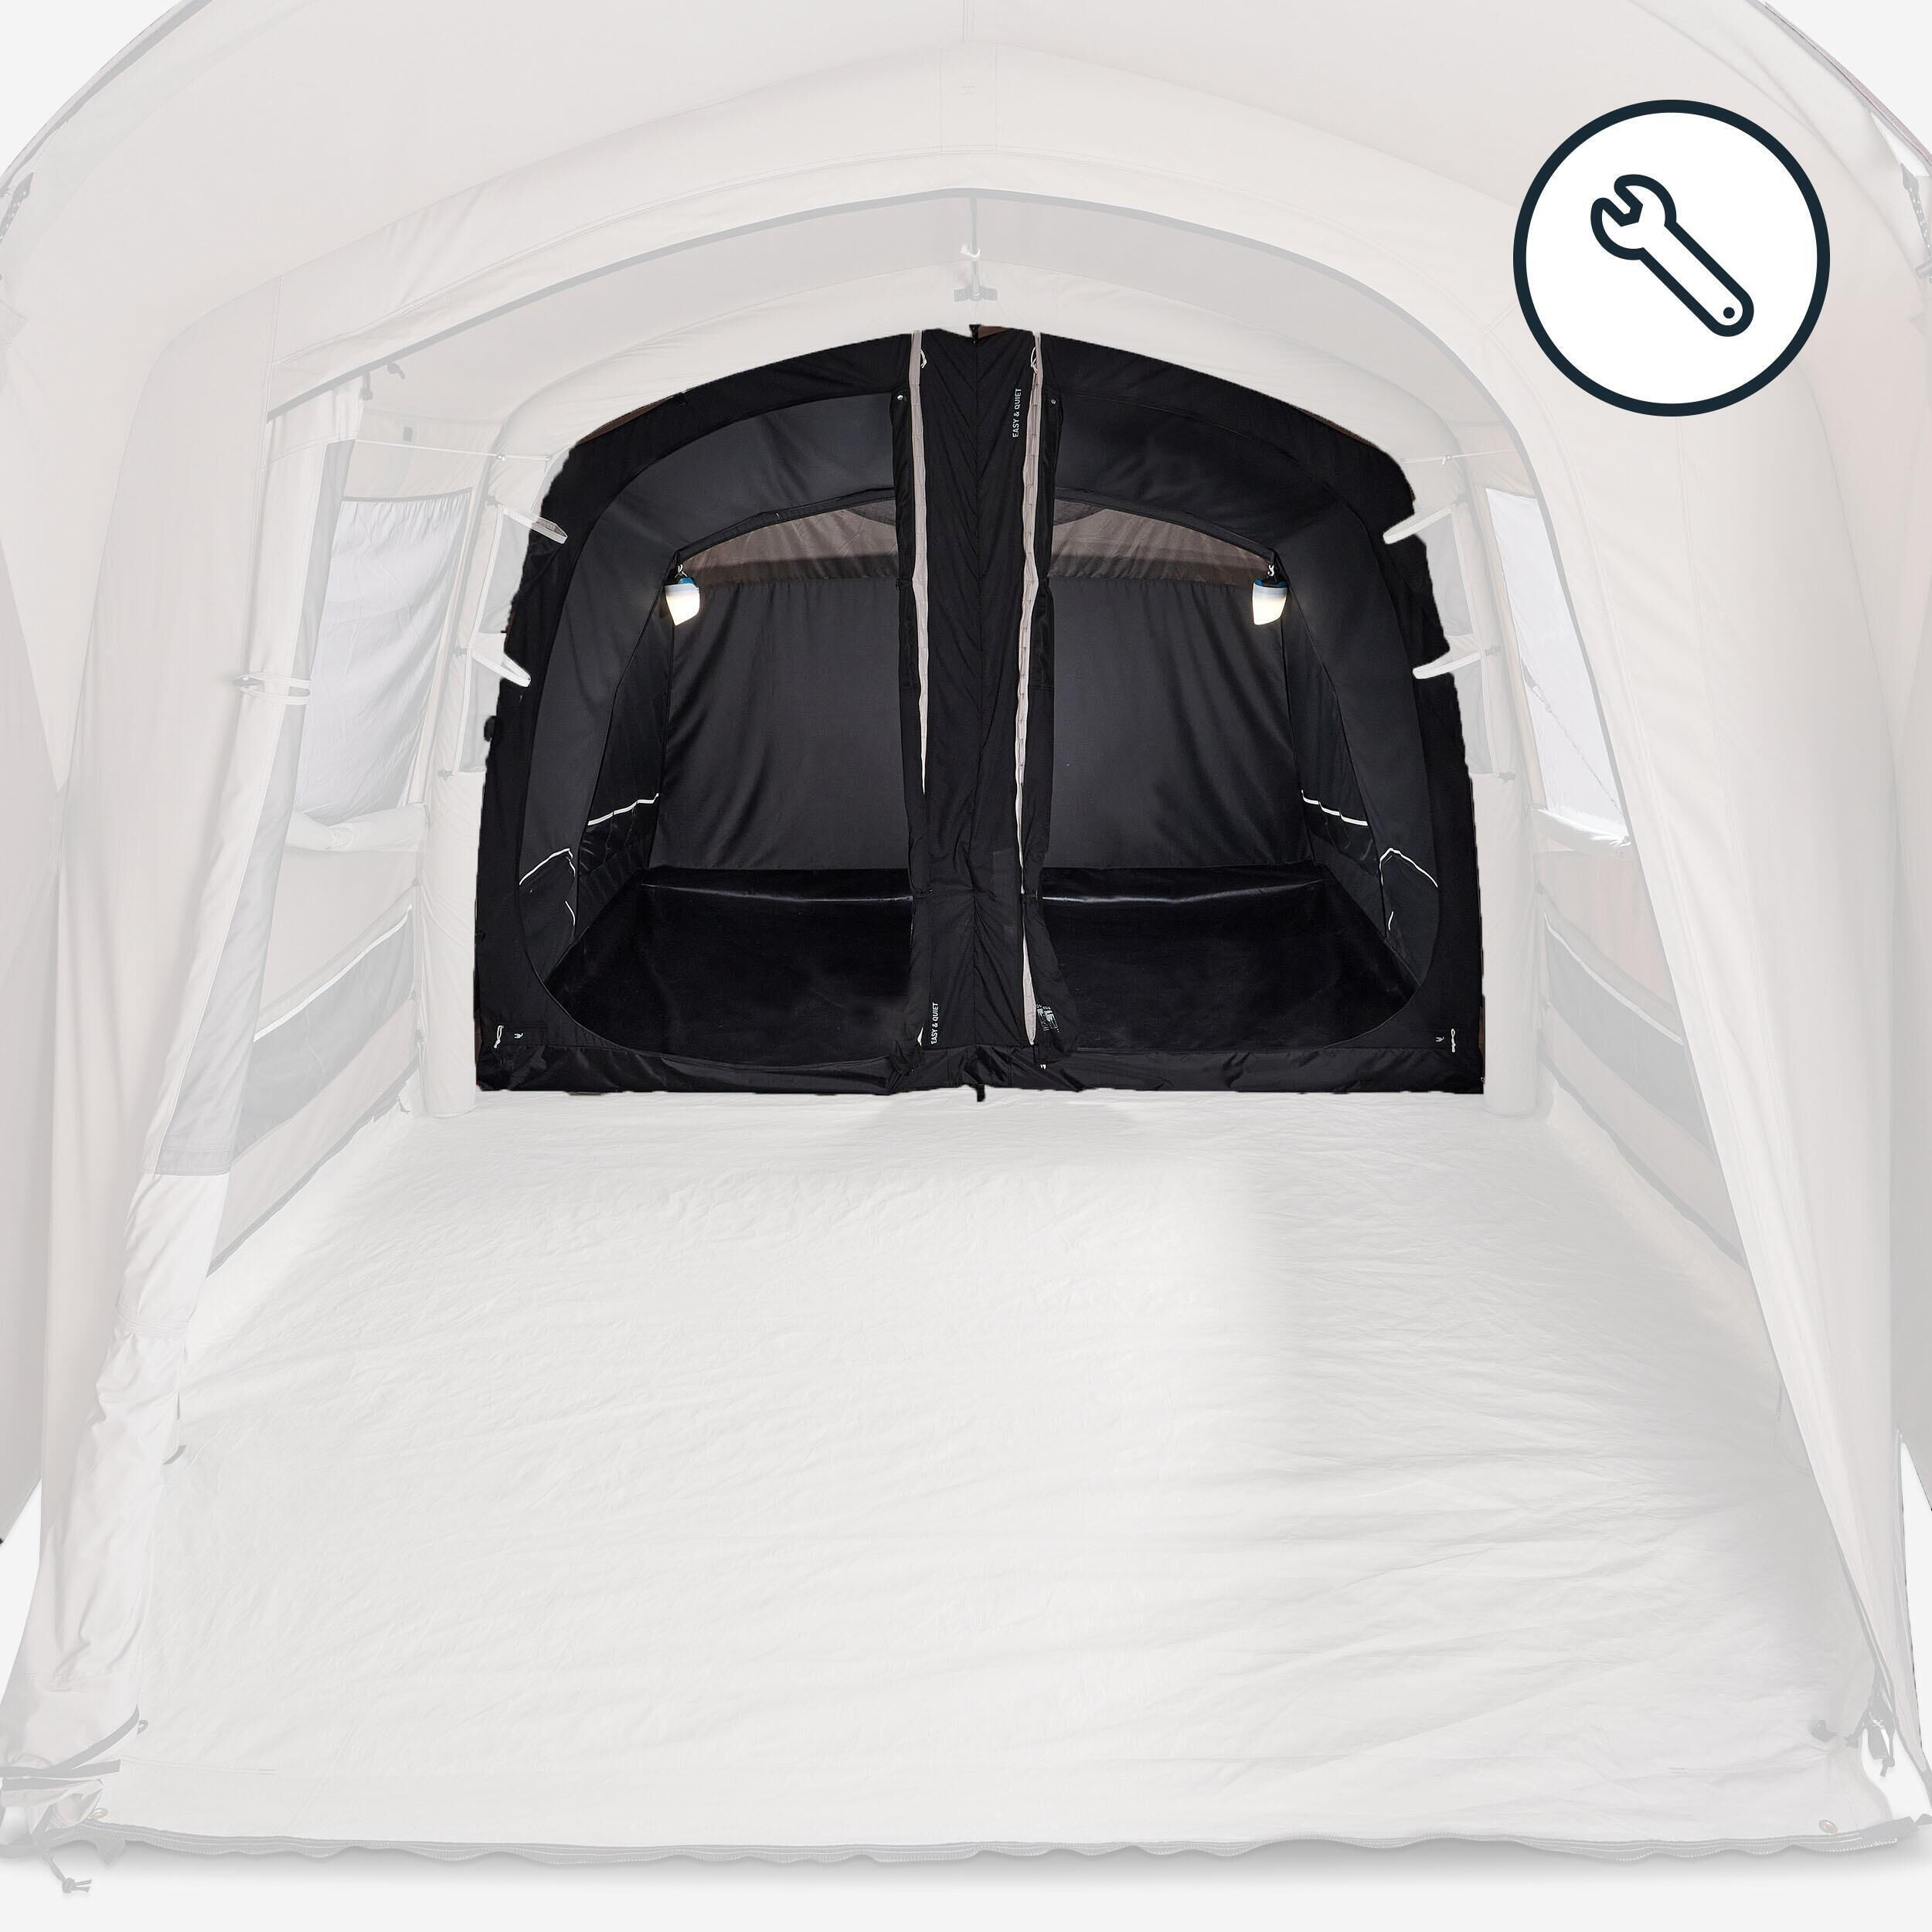 QUECHUA BEDROOM - SPARE PART FOR THE AIR SECONDS 4.2 POLYCOTTON TENT